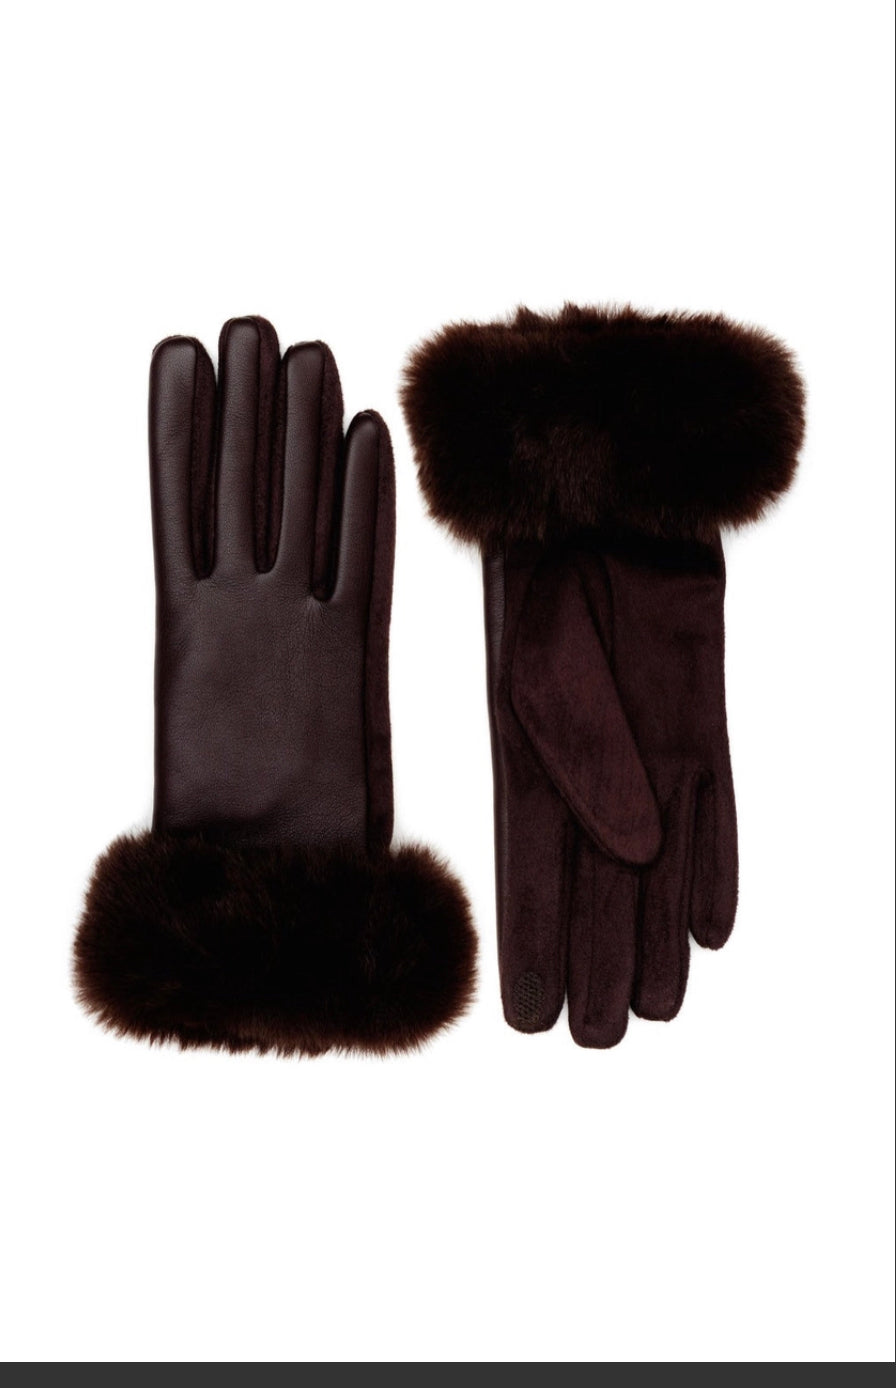 Vegan Leather and Suede Fur Trimmed Gloves